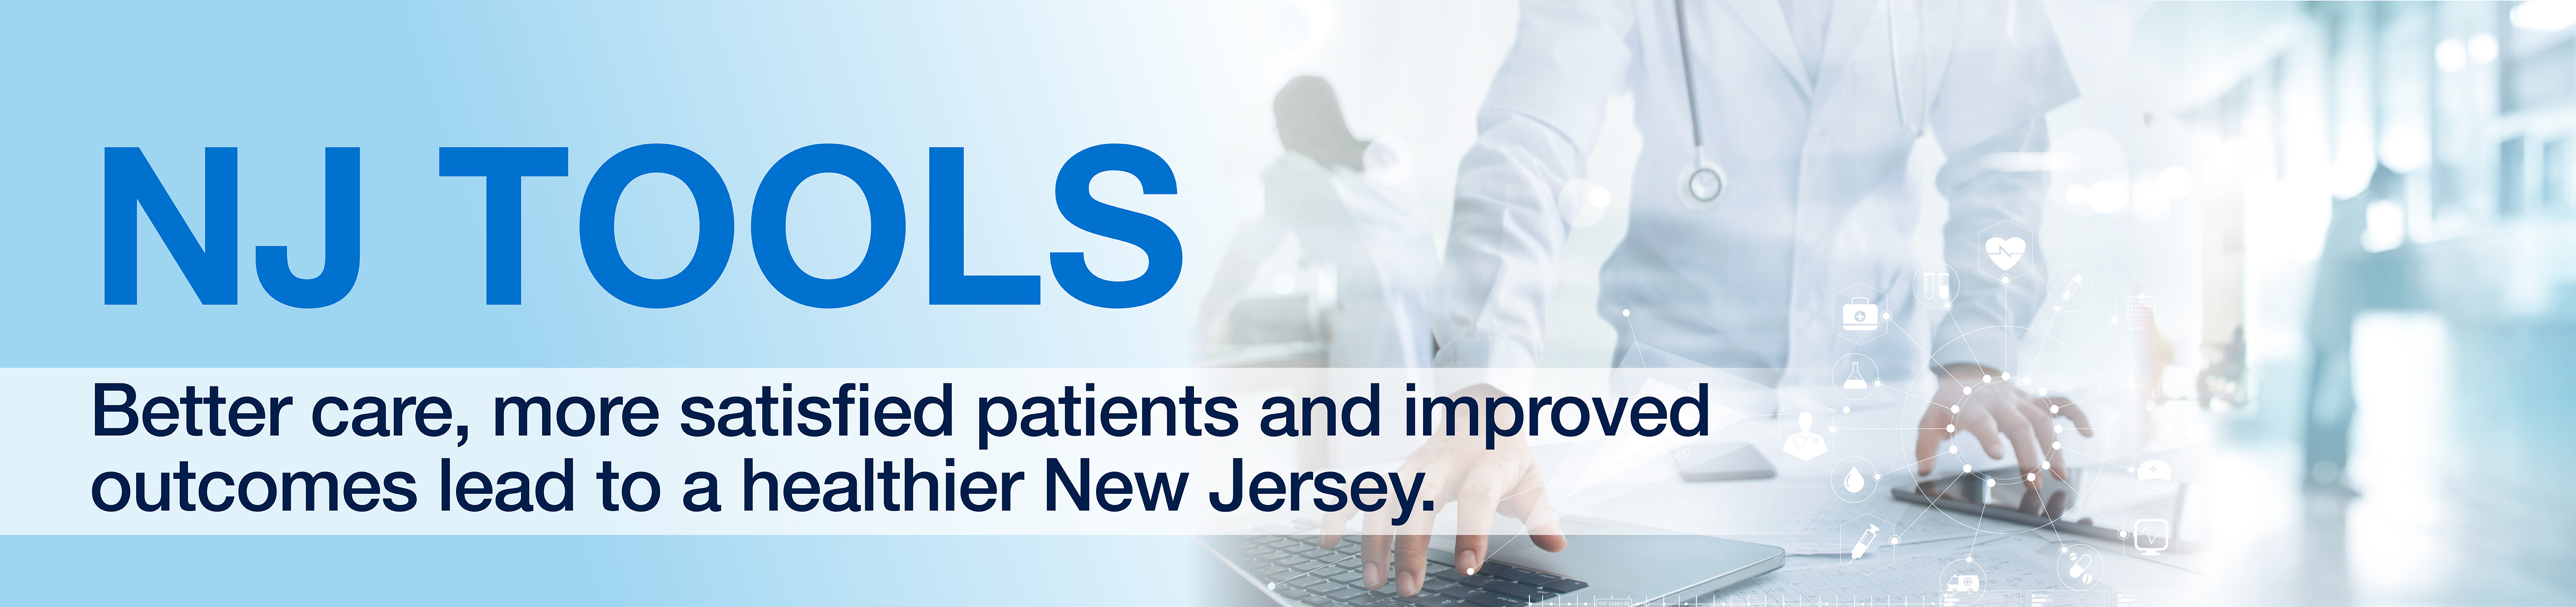 NJ Tools Banner: Better care, more satisfied patients and improved outcomes lead to a healthier New Jersey.